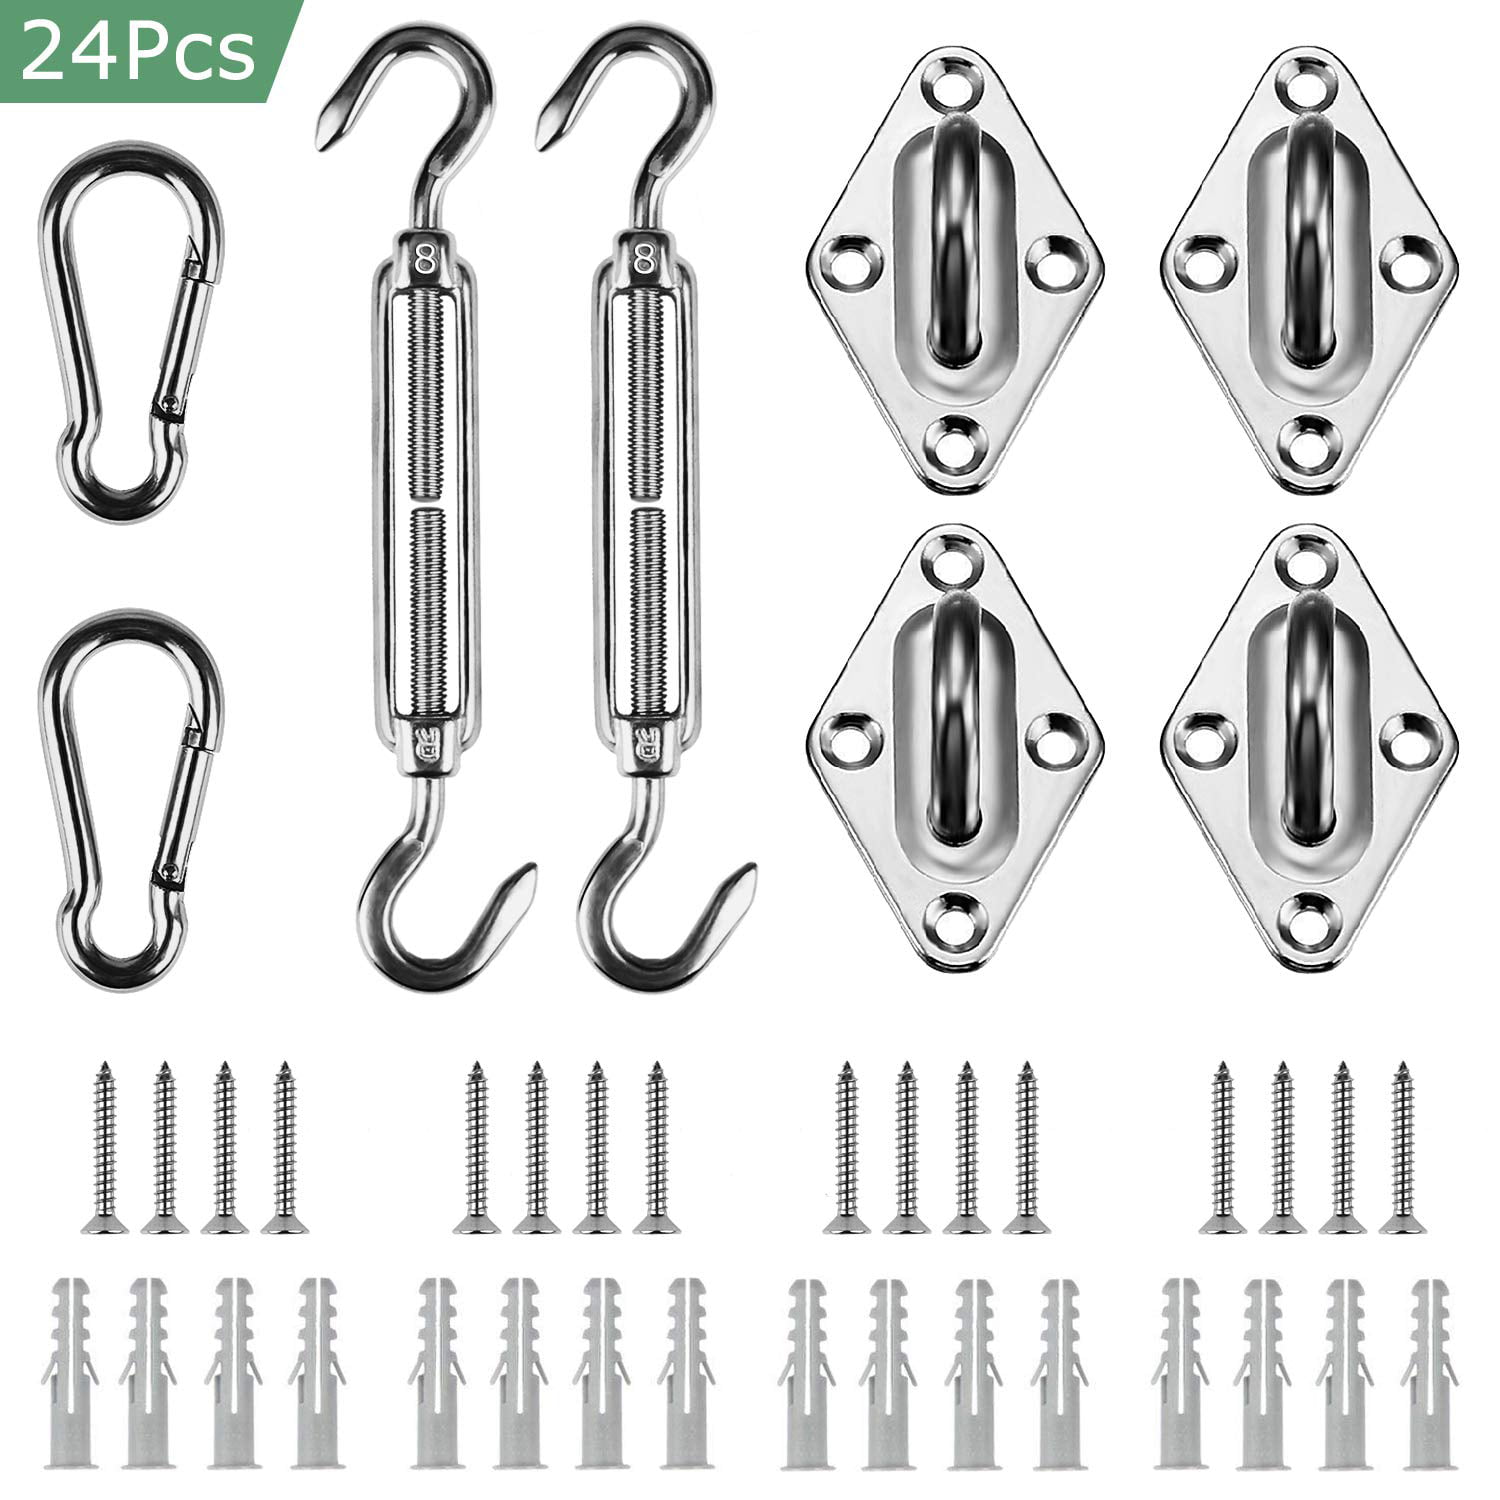 Sun Shade Installation Kit 8pcs/Set Stainless Steel Sun Sail Hardware Kit with 2 Turnbuckles 2 Hooks 4 Mounting Pad Eyes for Outdoor Patio Covering 